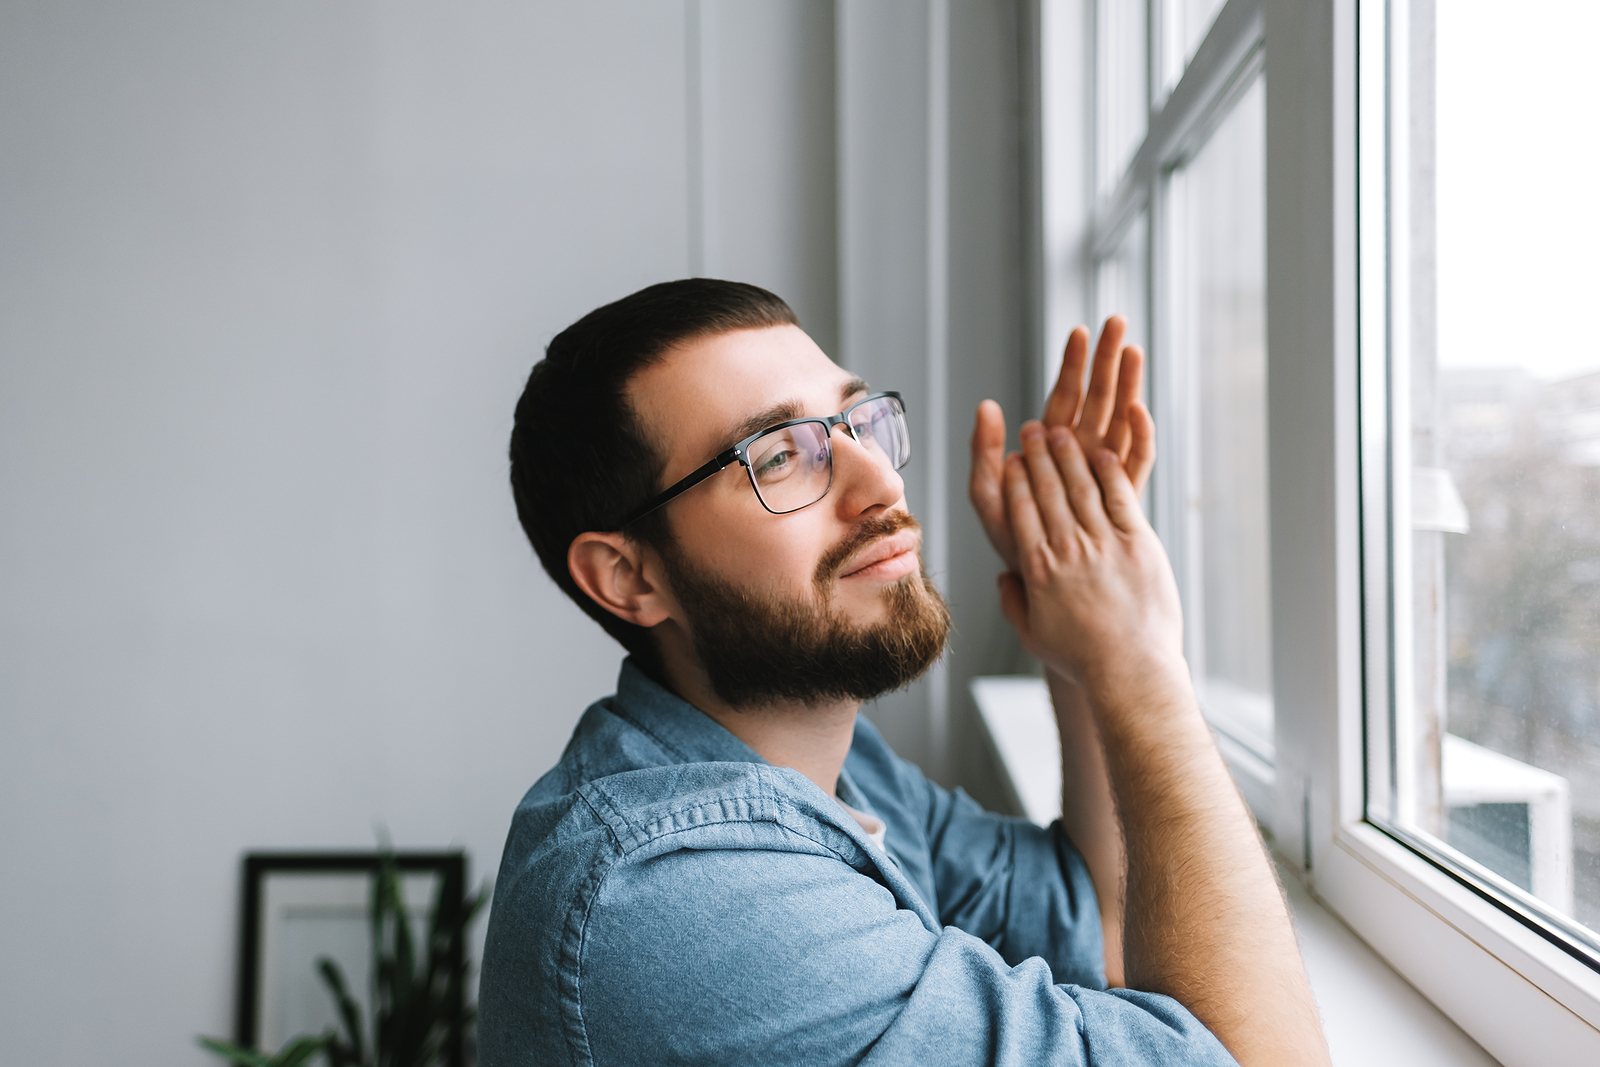 White man with a beard and glasses, day dreaming near a window looking out.